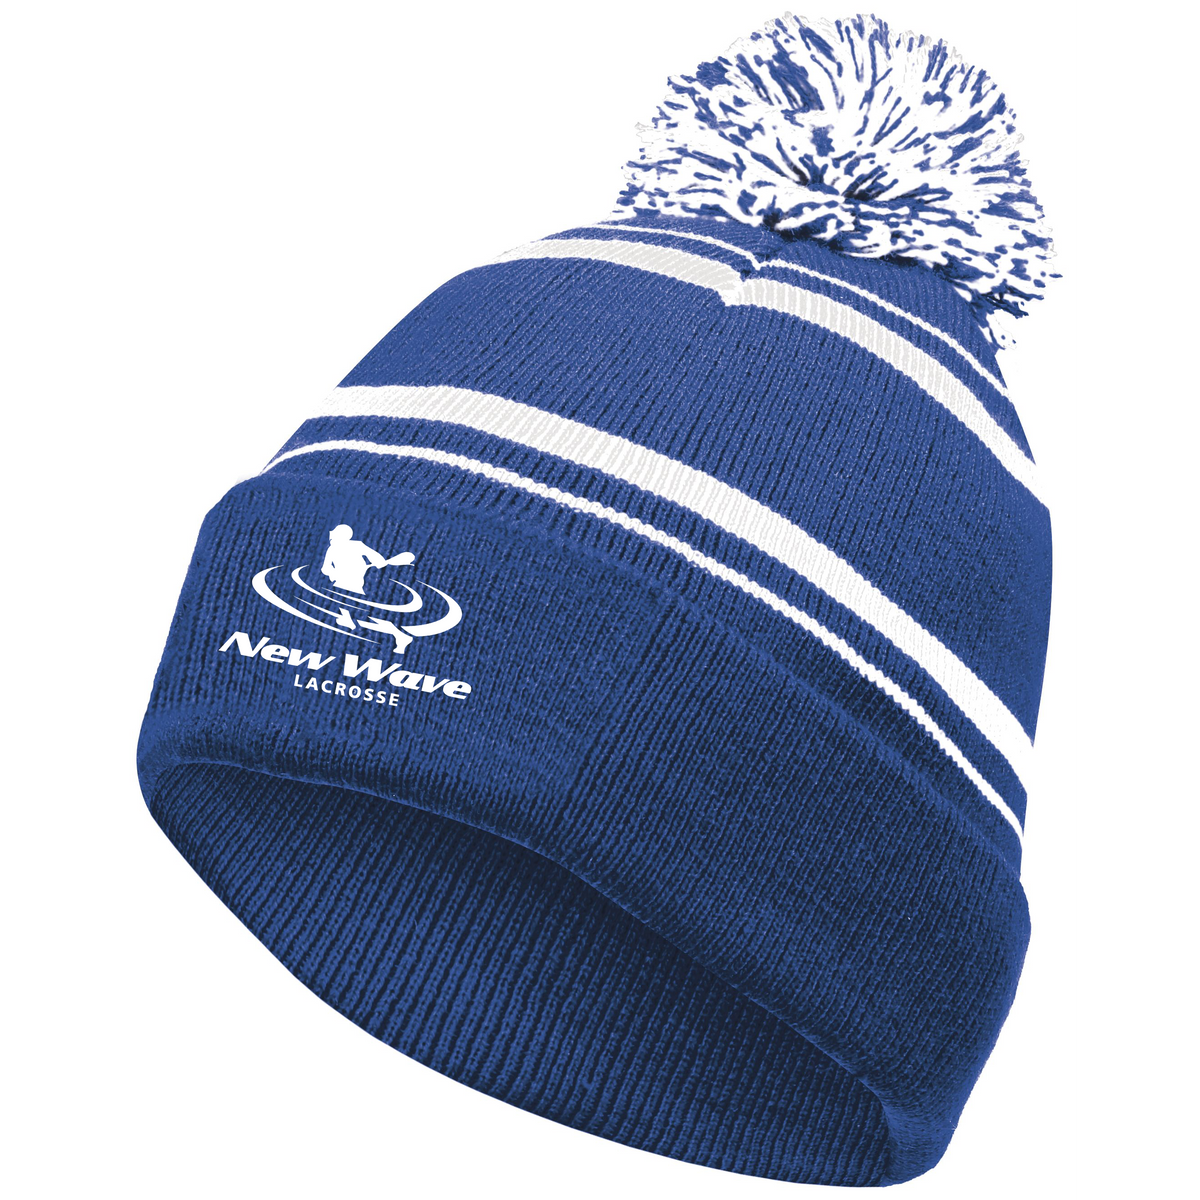 New Wave Boys Lacrosse Homecoming Beanie